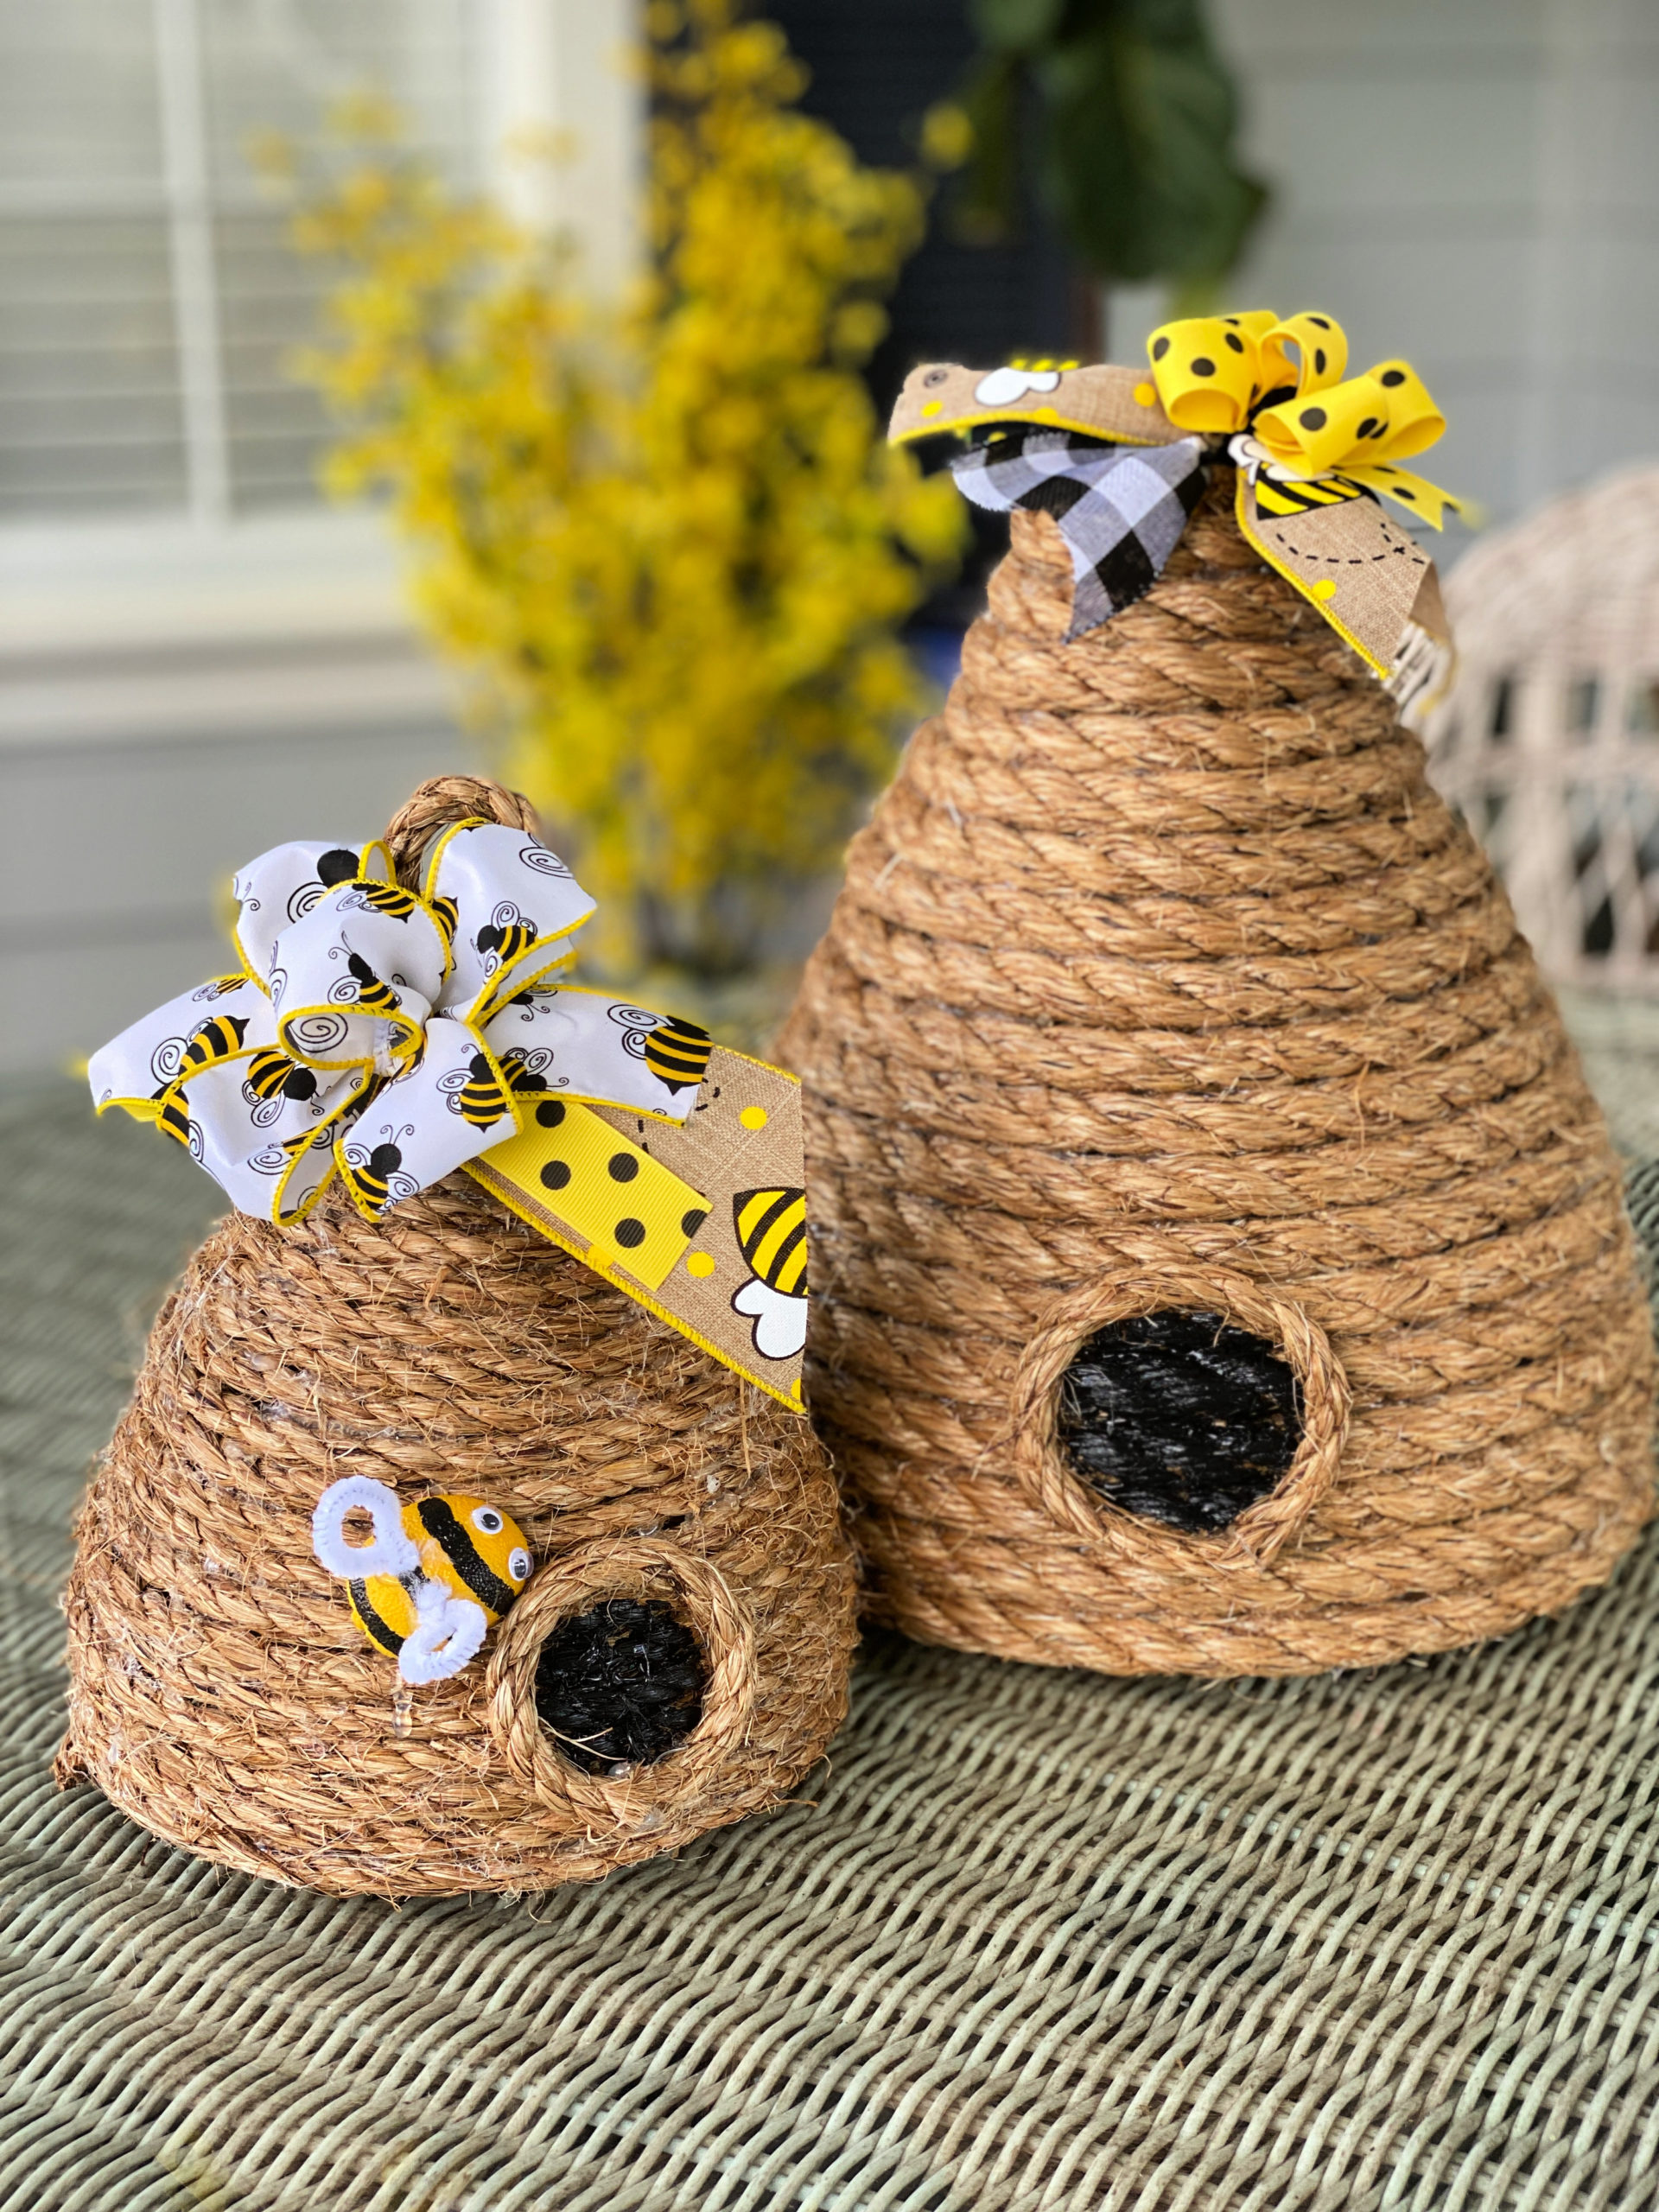 Bee Party Decoration Set of 1, Large Paper Honey Bee Paper Bee